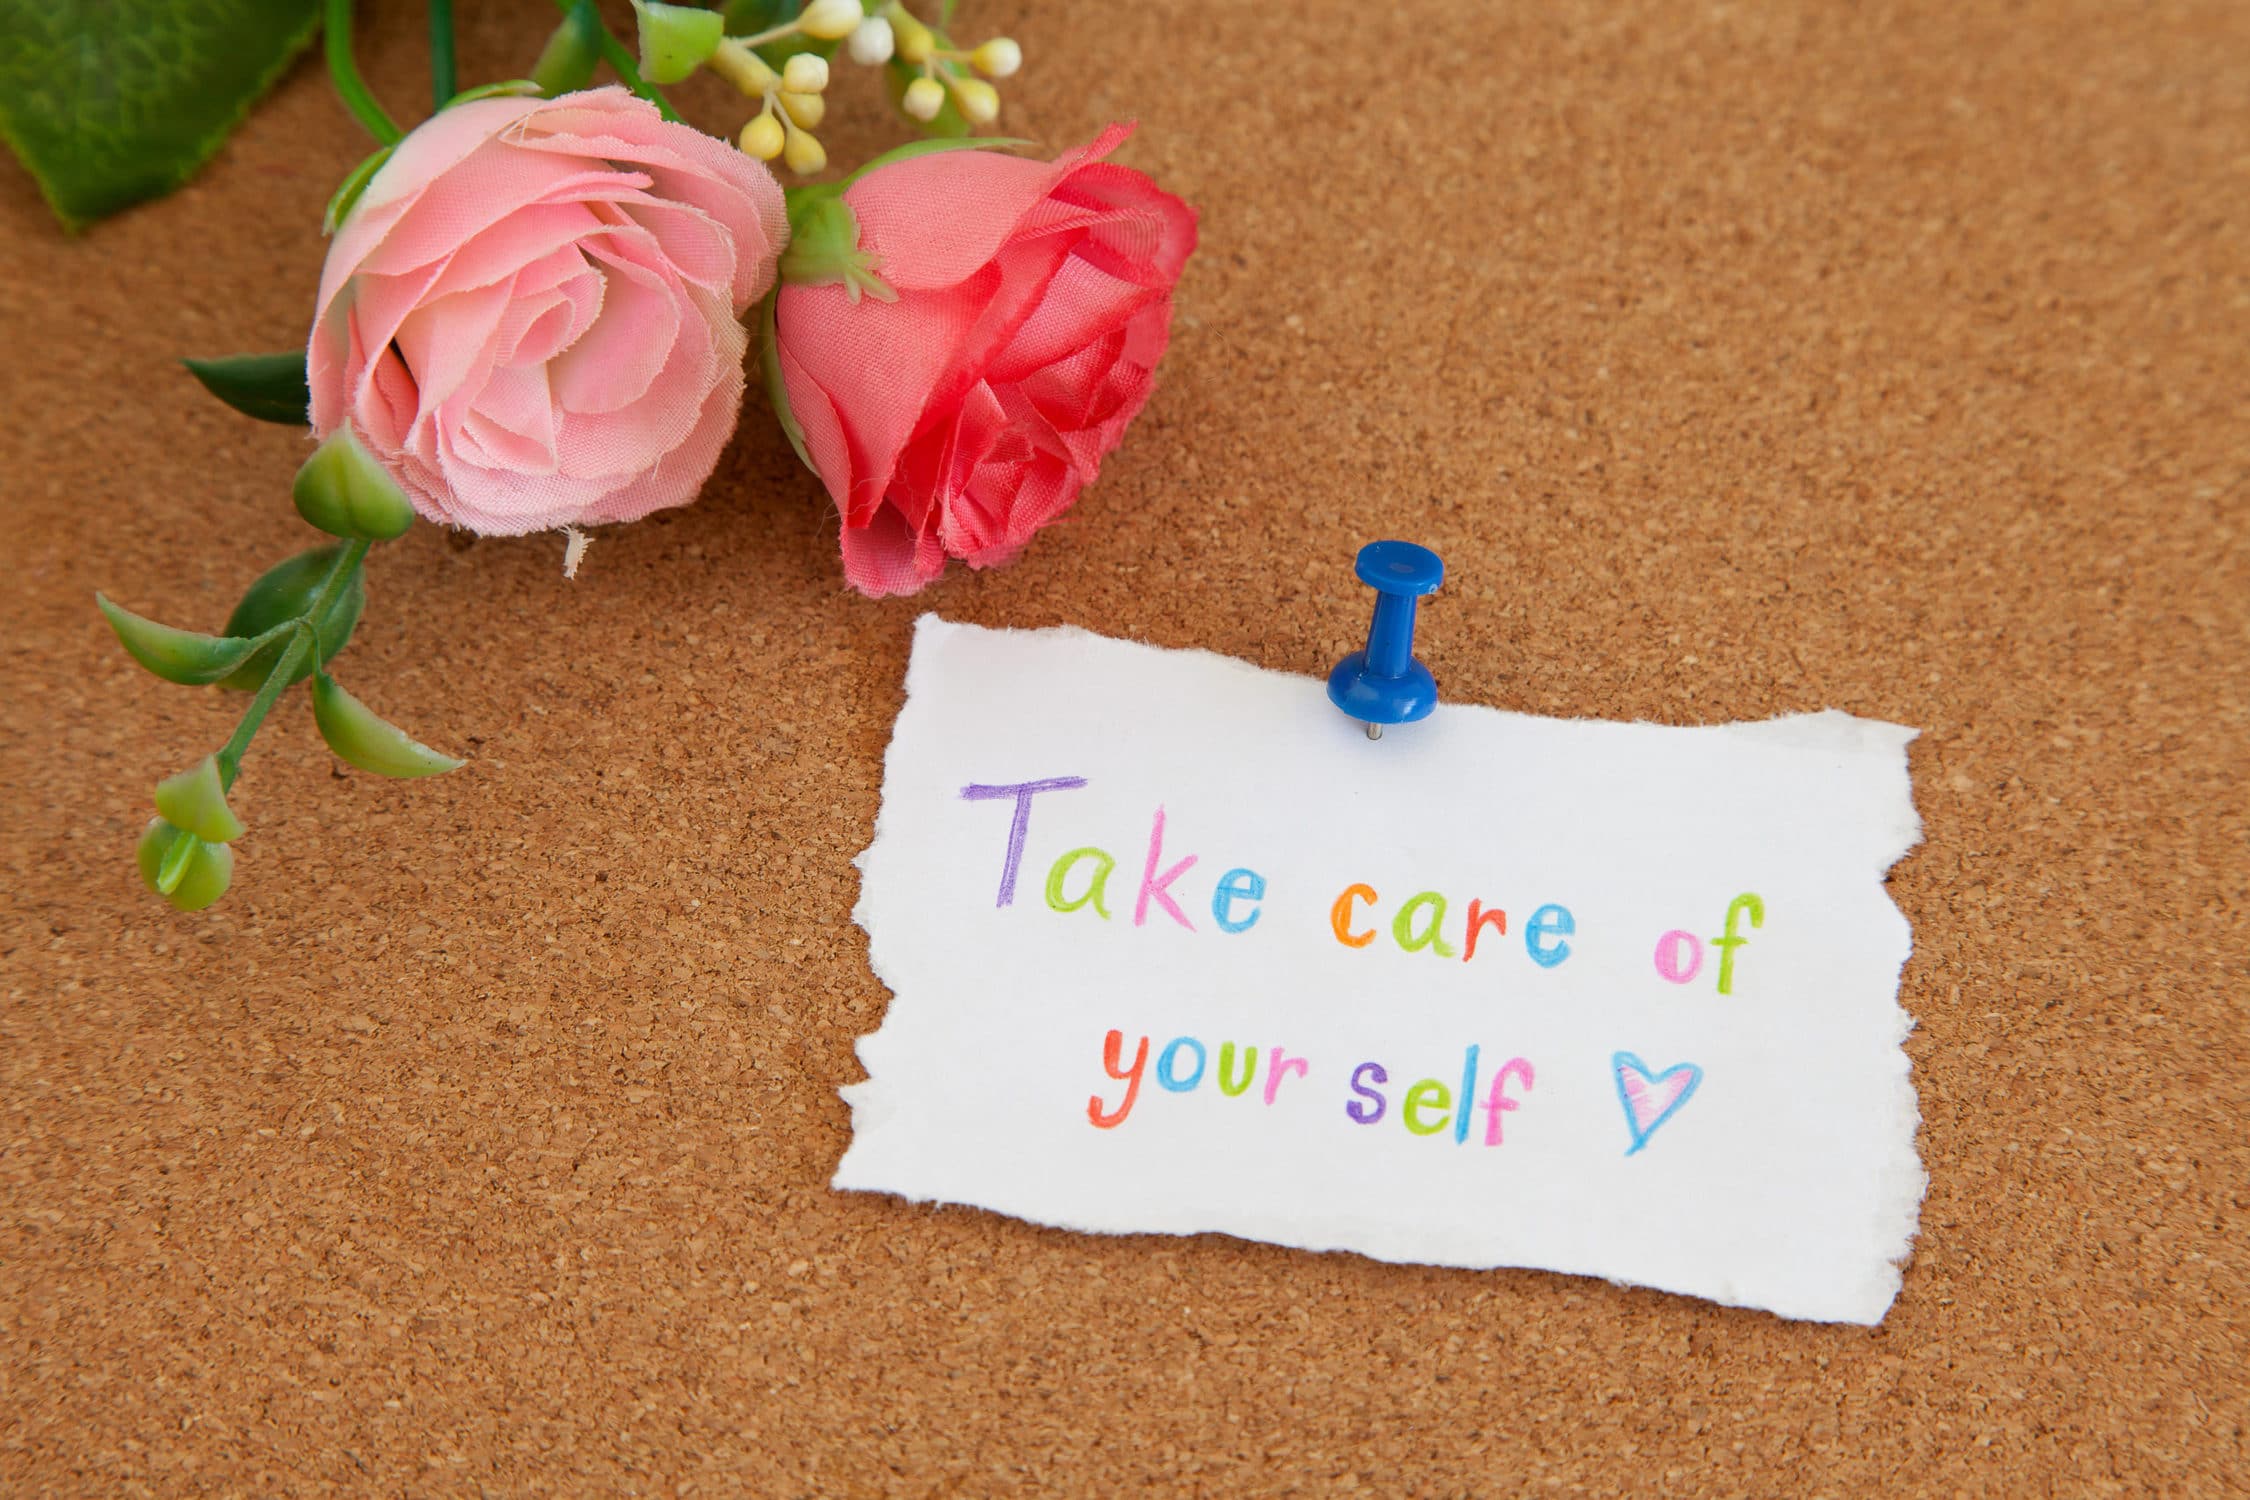 Take care of your self message - Hand writing text on cork board